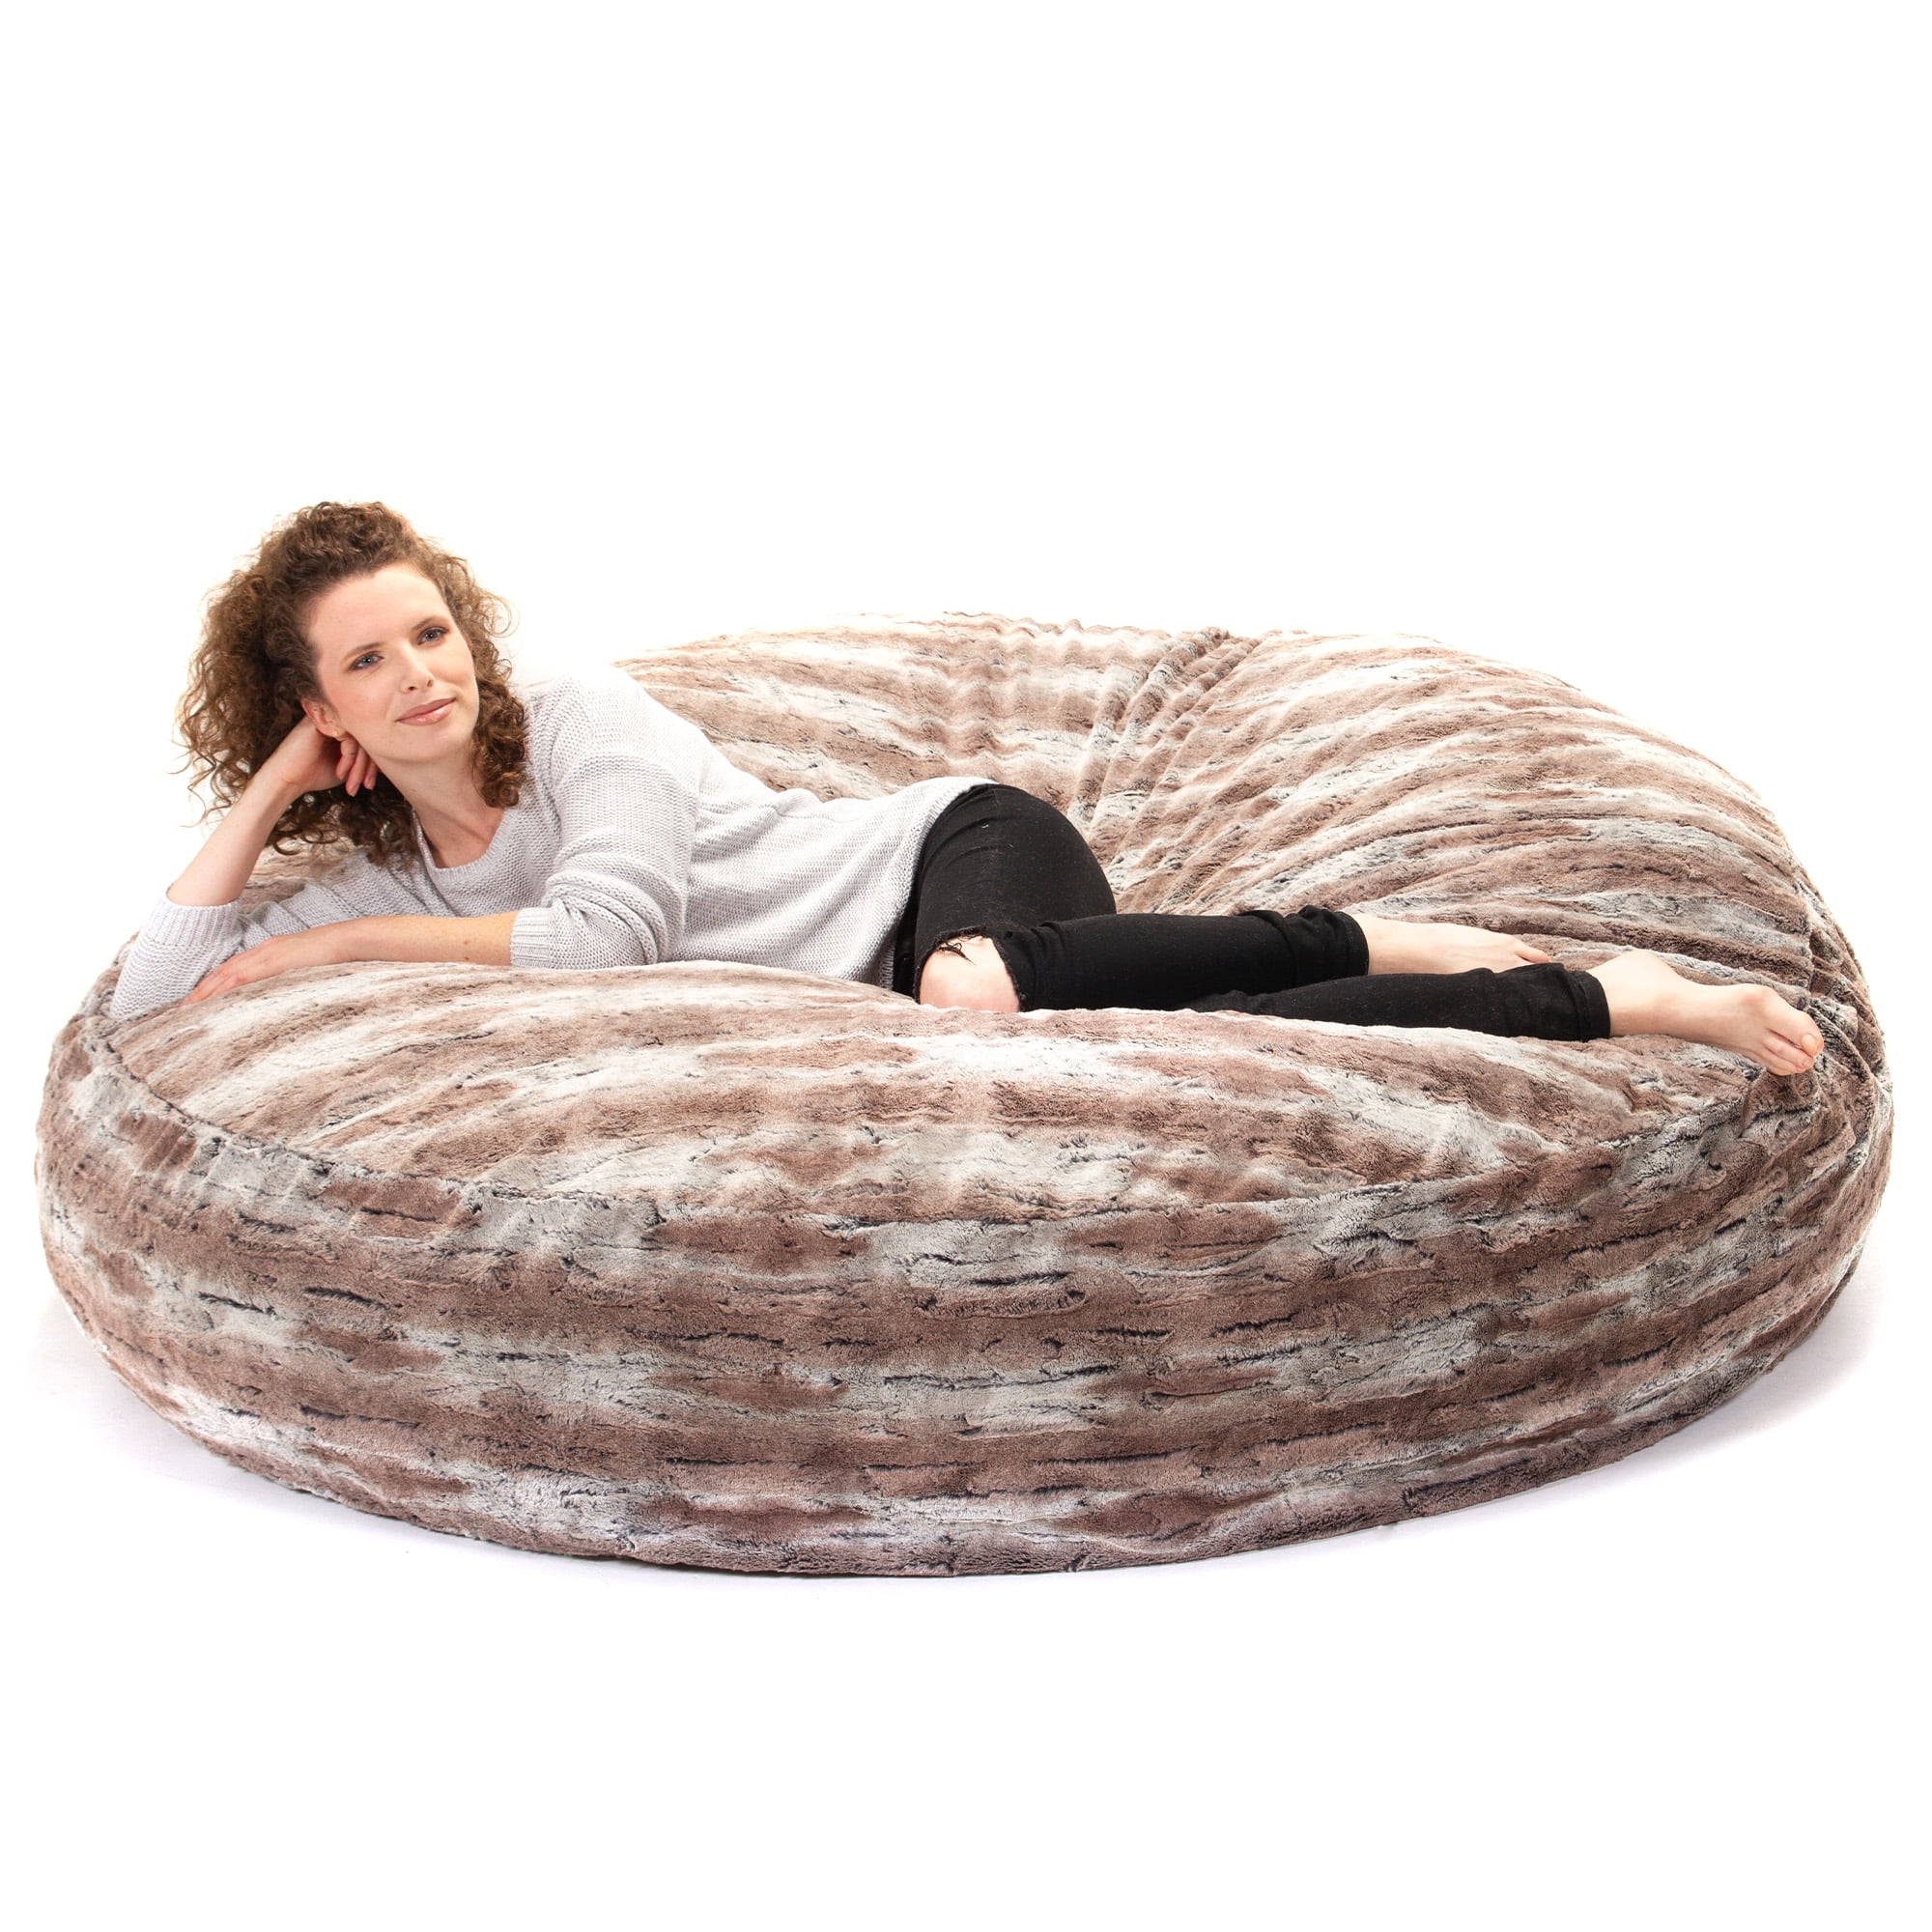 Jaxx 6 Foot Cocoon - Large Bean Bag Chair for Adults, Premium Luxe Faux ...